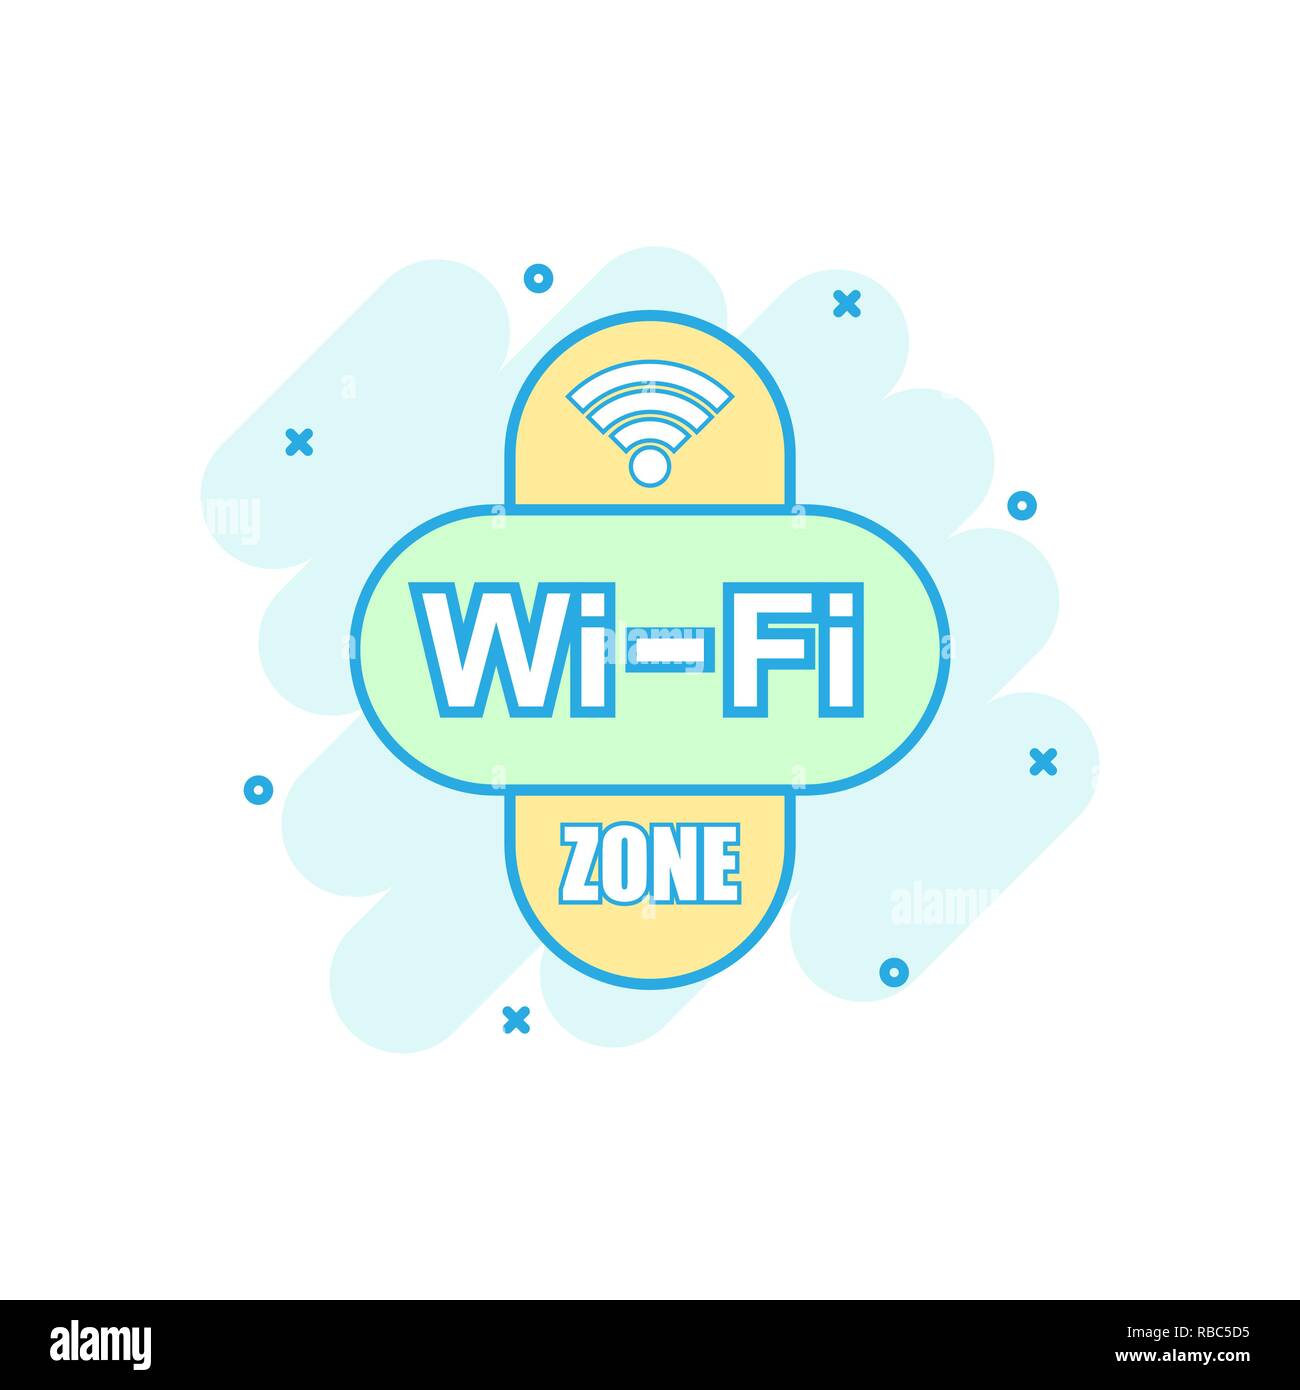 Wifi zone icon in comic style. Wi-fi wireless technology vector cartoon illustration pictogram. Network wifi business concept splash effect. Stock Vector